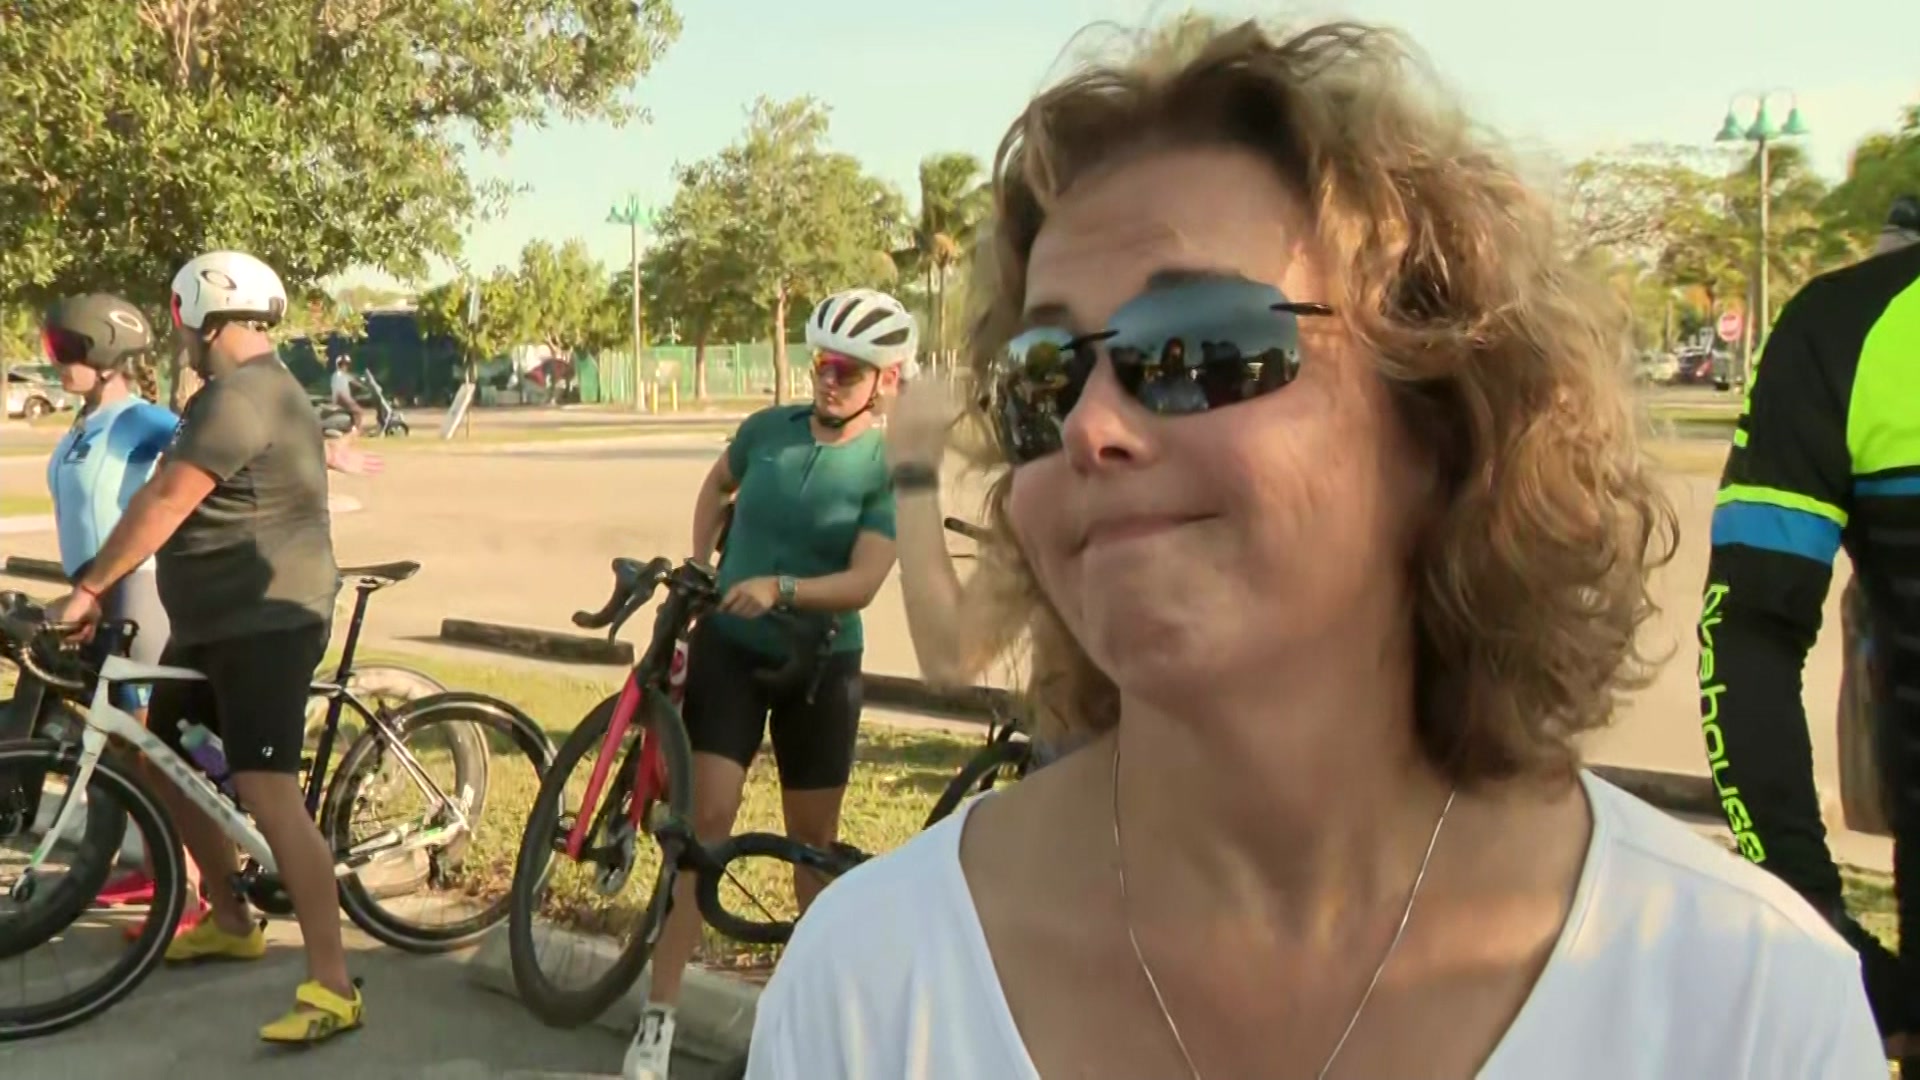 Wife Of Slain Cyclist Pushes For Safety Measures After 2 More Deaths On Rickenbacker Causeway